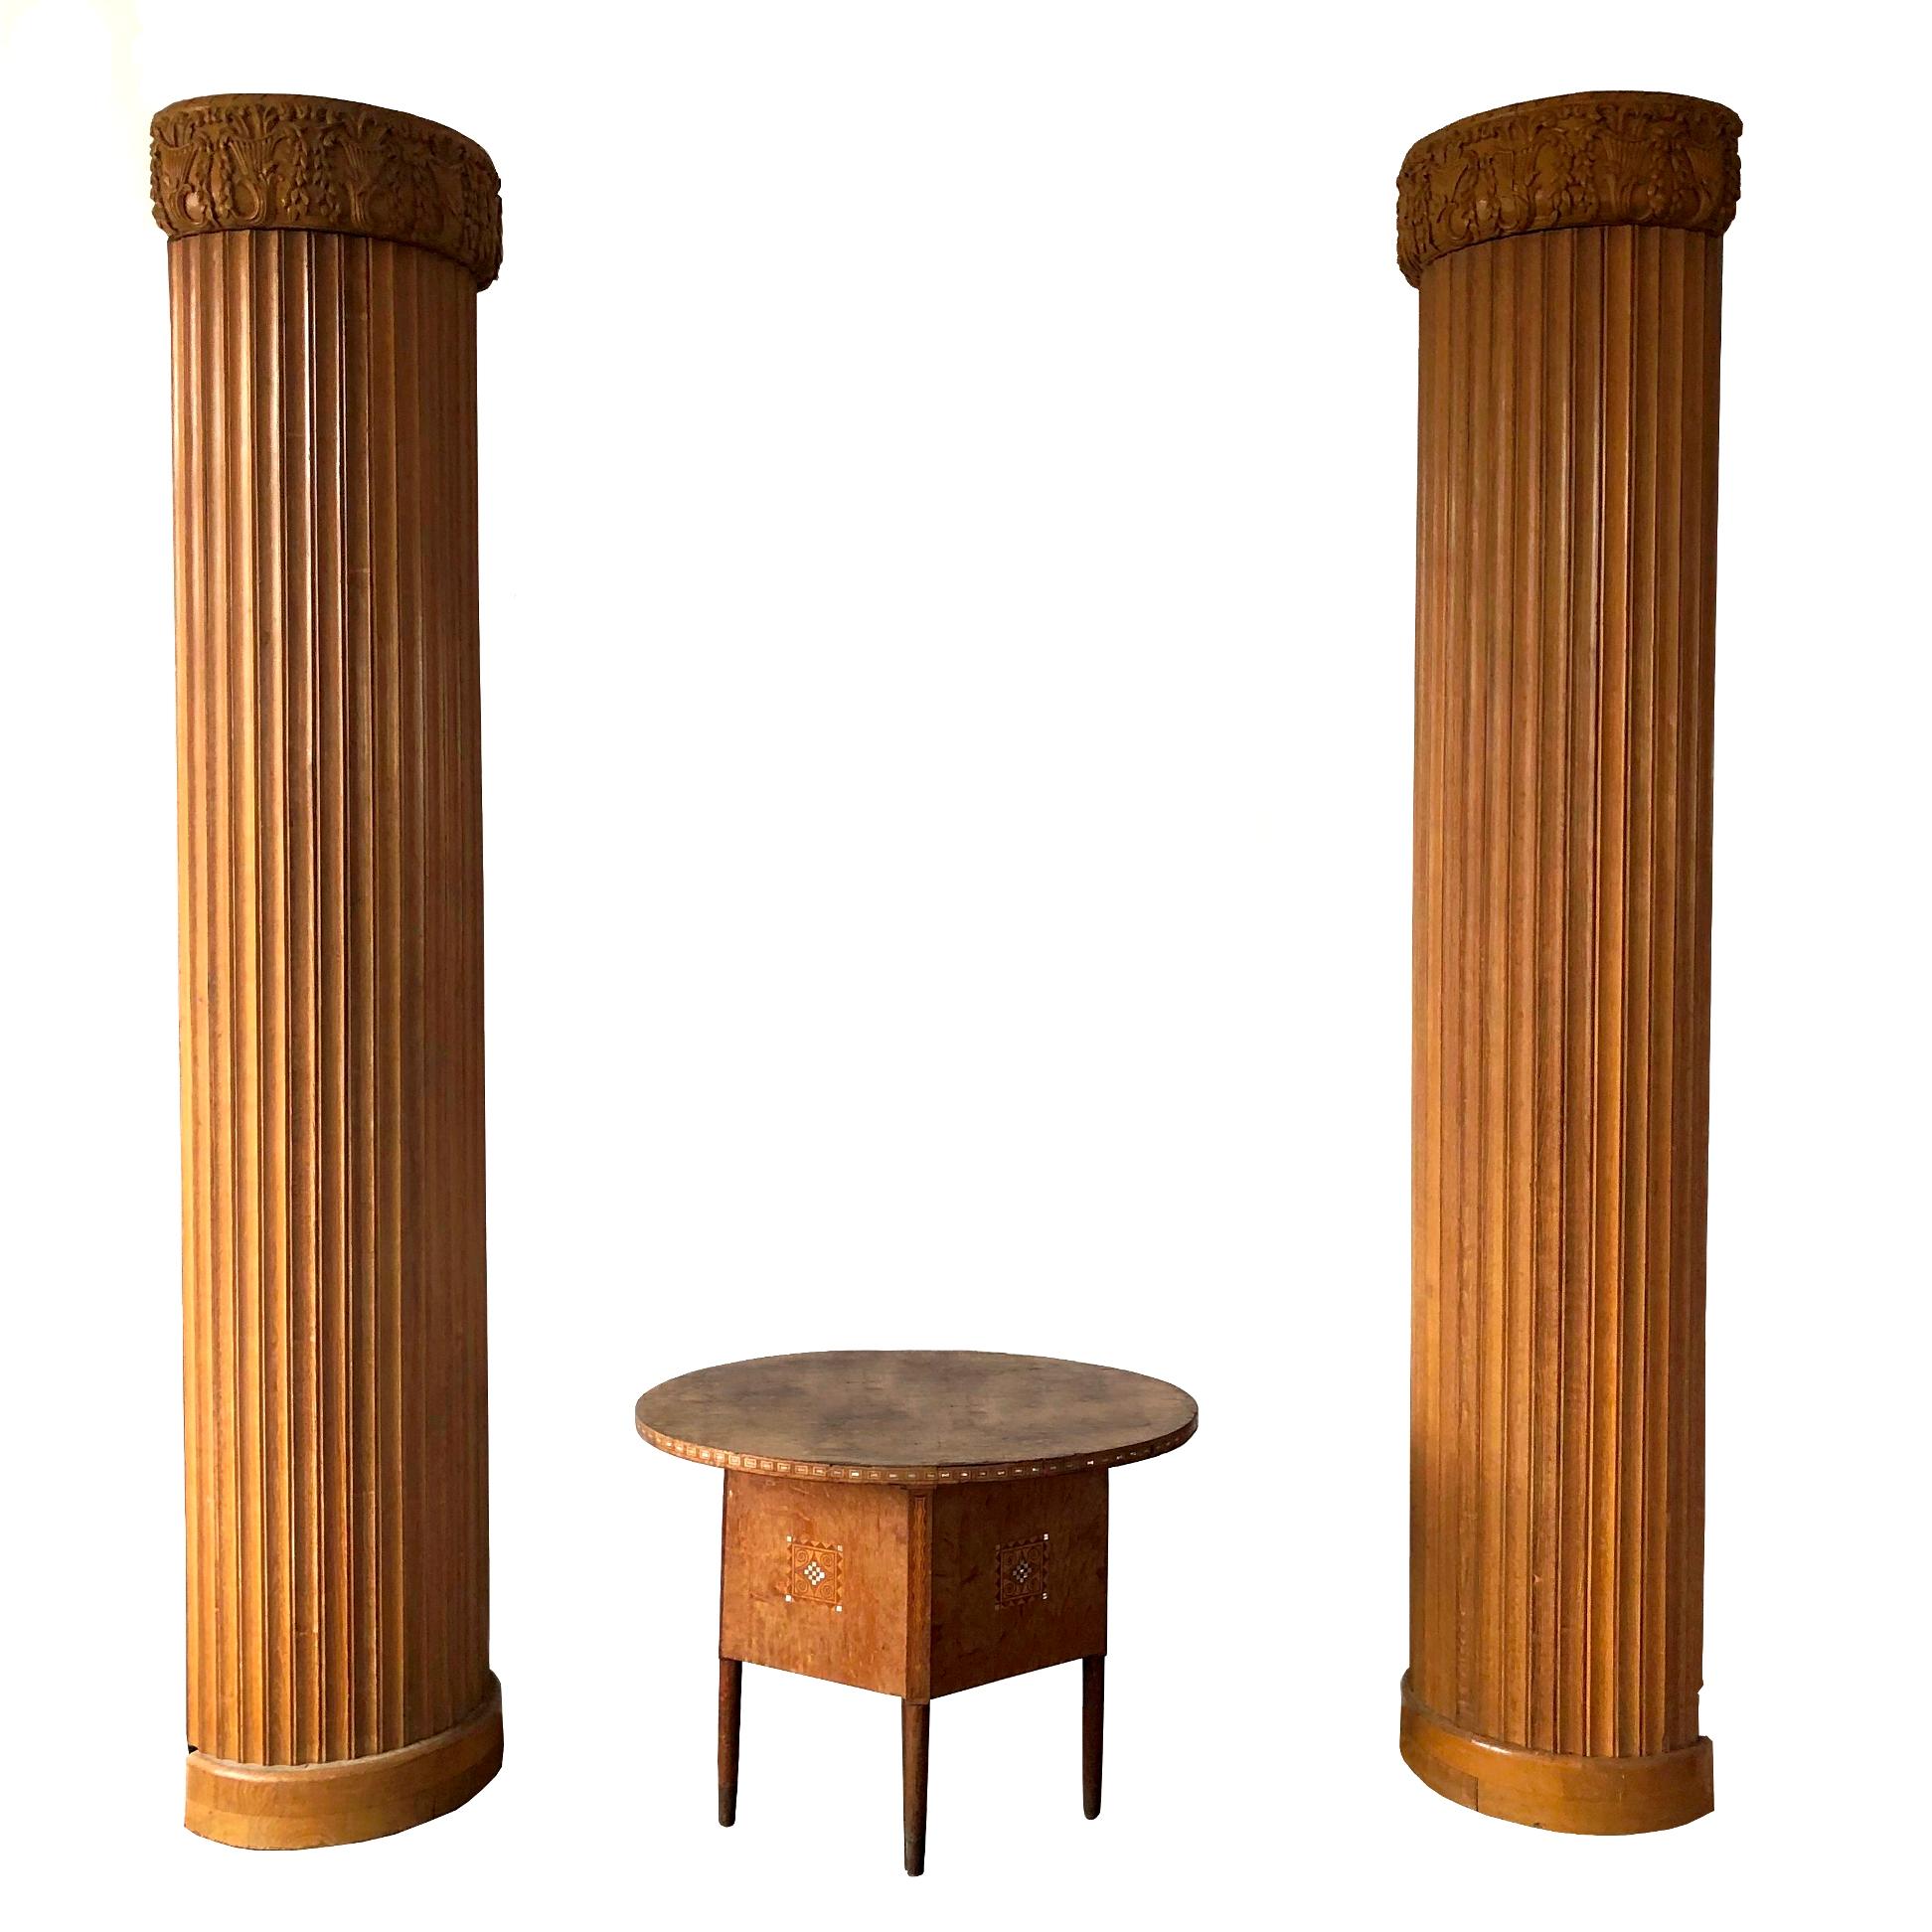 Very tall wood column comprising two halves. The column was salvaged from a villa in Vienna, Austria in late 1990s.
The item was acquired from a collector in Graz, Austria.
 